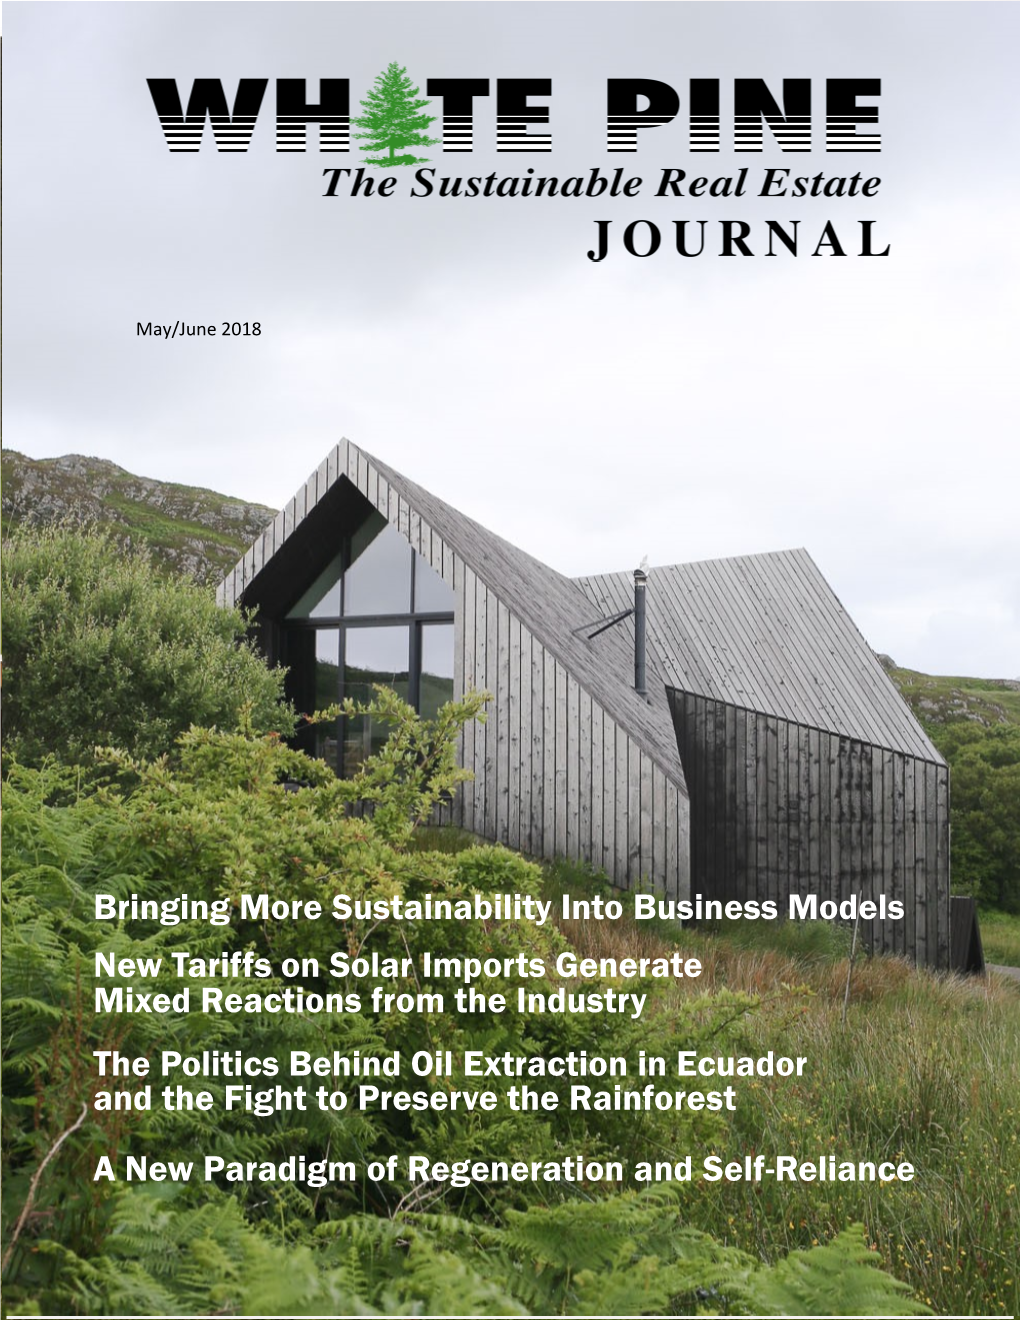 The Sustainable Real Estate Journal